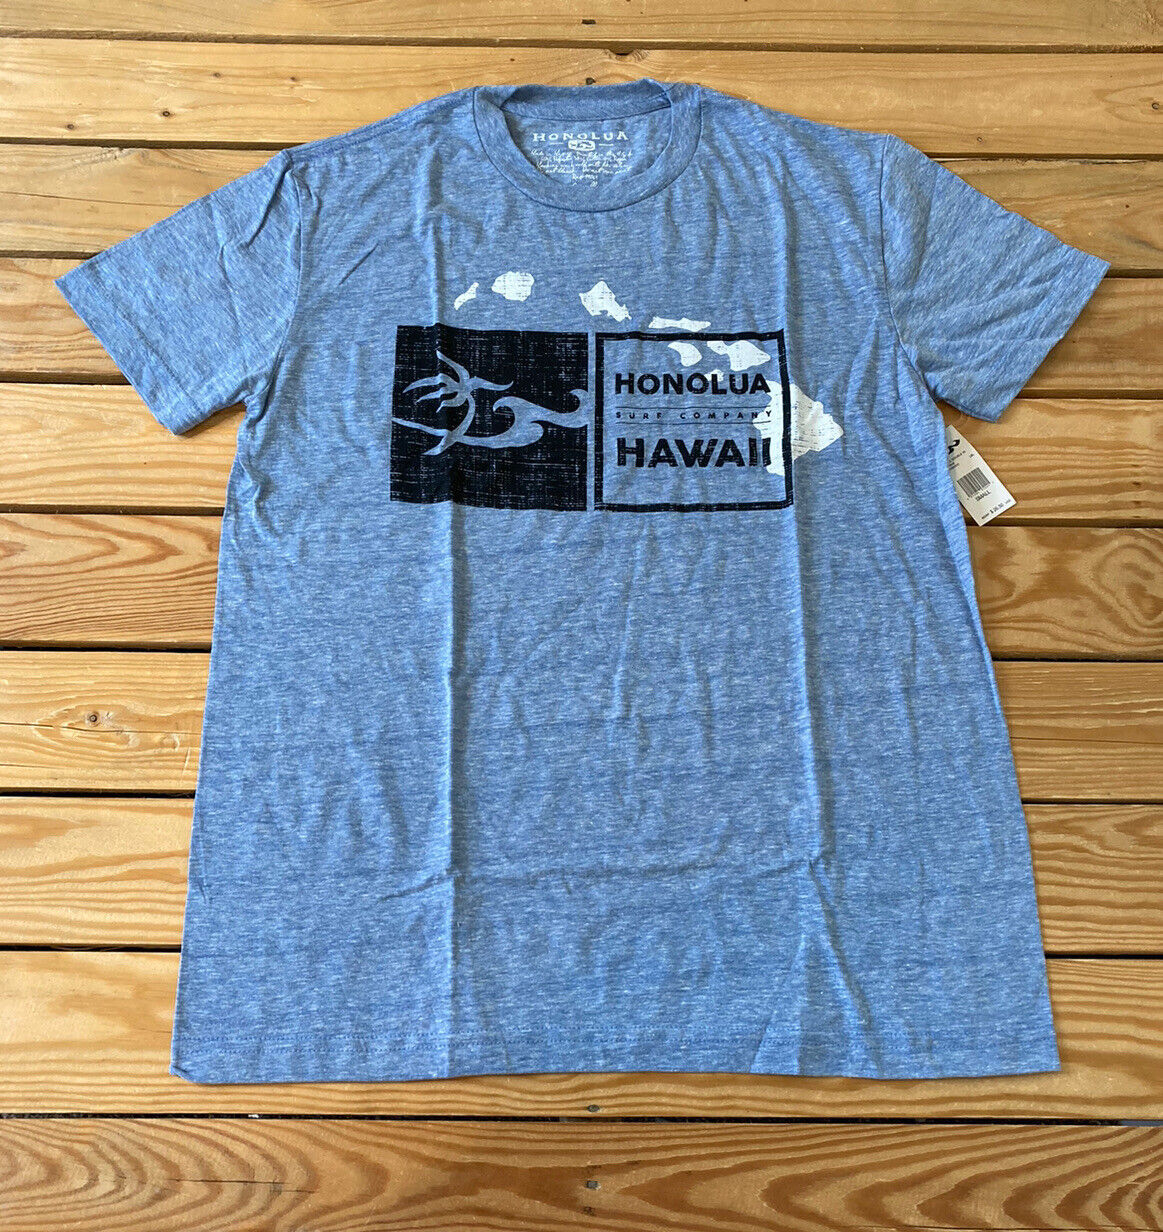 Primary image for honolua NWT $26.50 men’s short sleeve graphic t shirt size S Blue P6